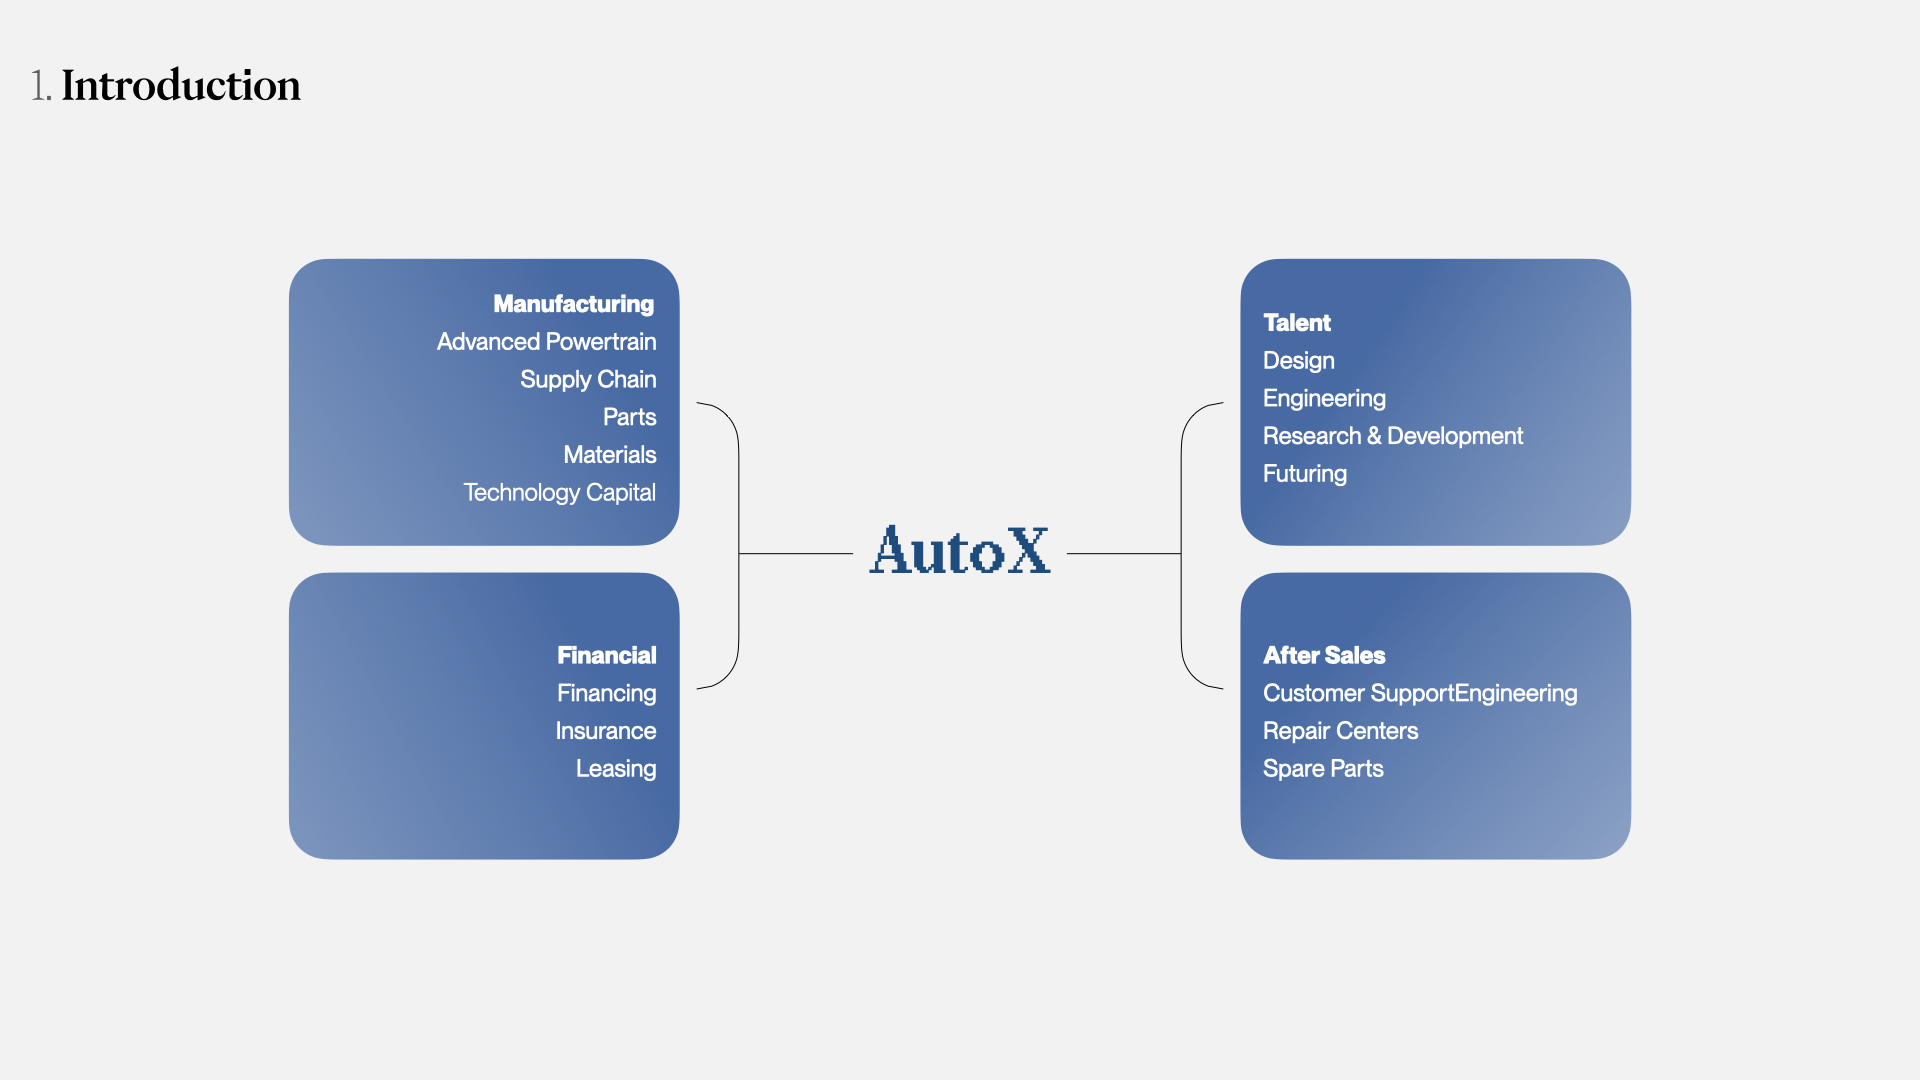 Diagram showing AutoX's strengths and capabilities